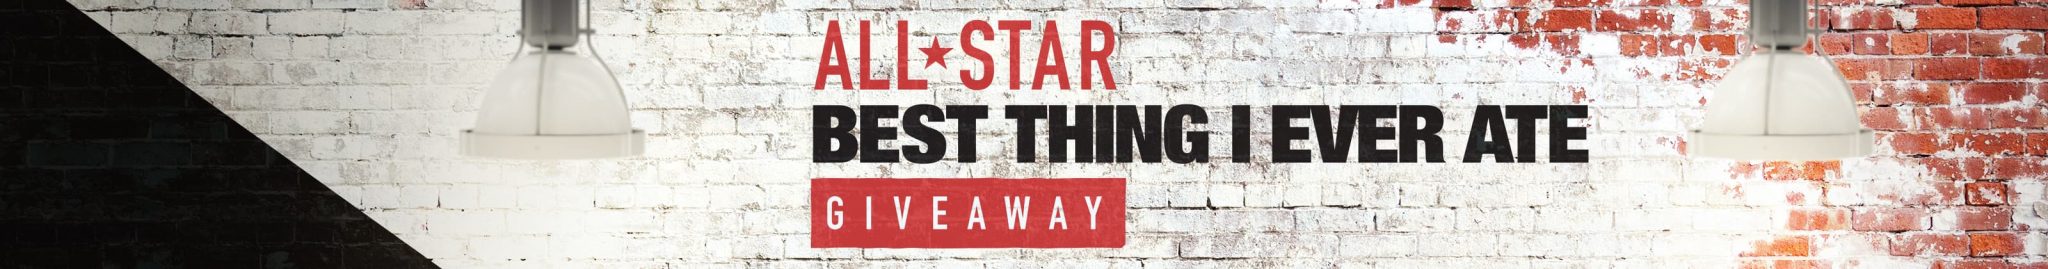 Food Network Best Thing I Ever Ate Giveaway 2048x269 